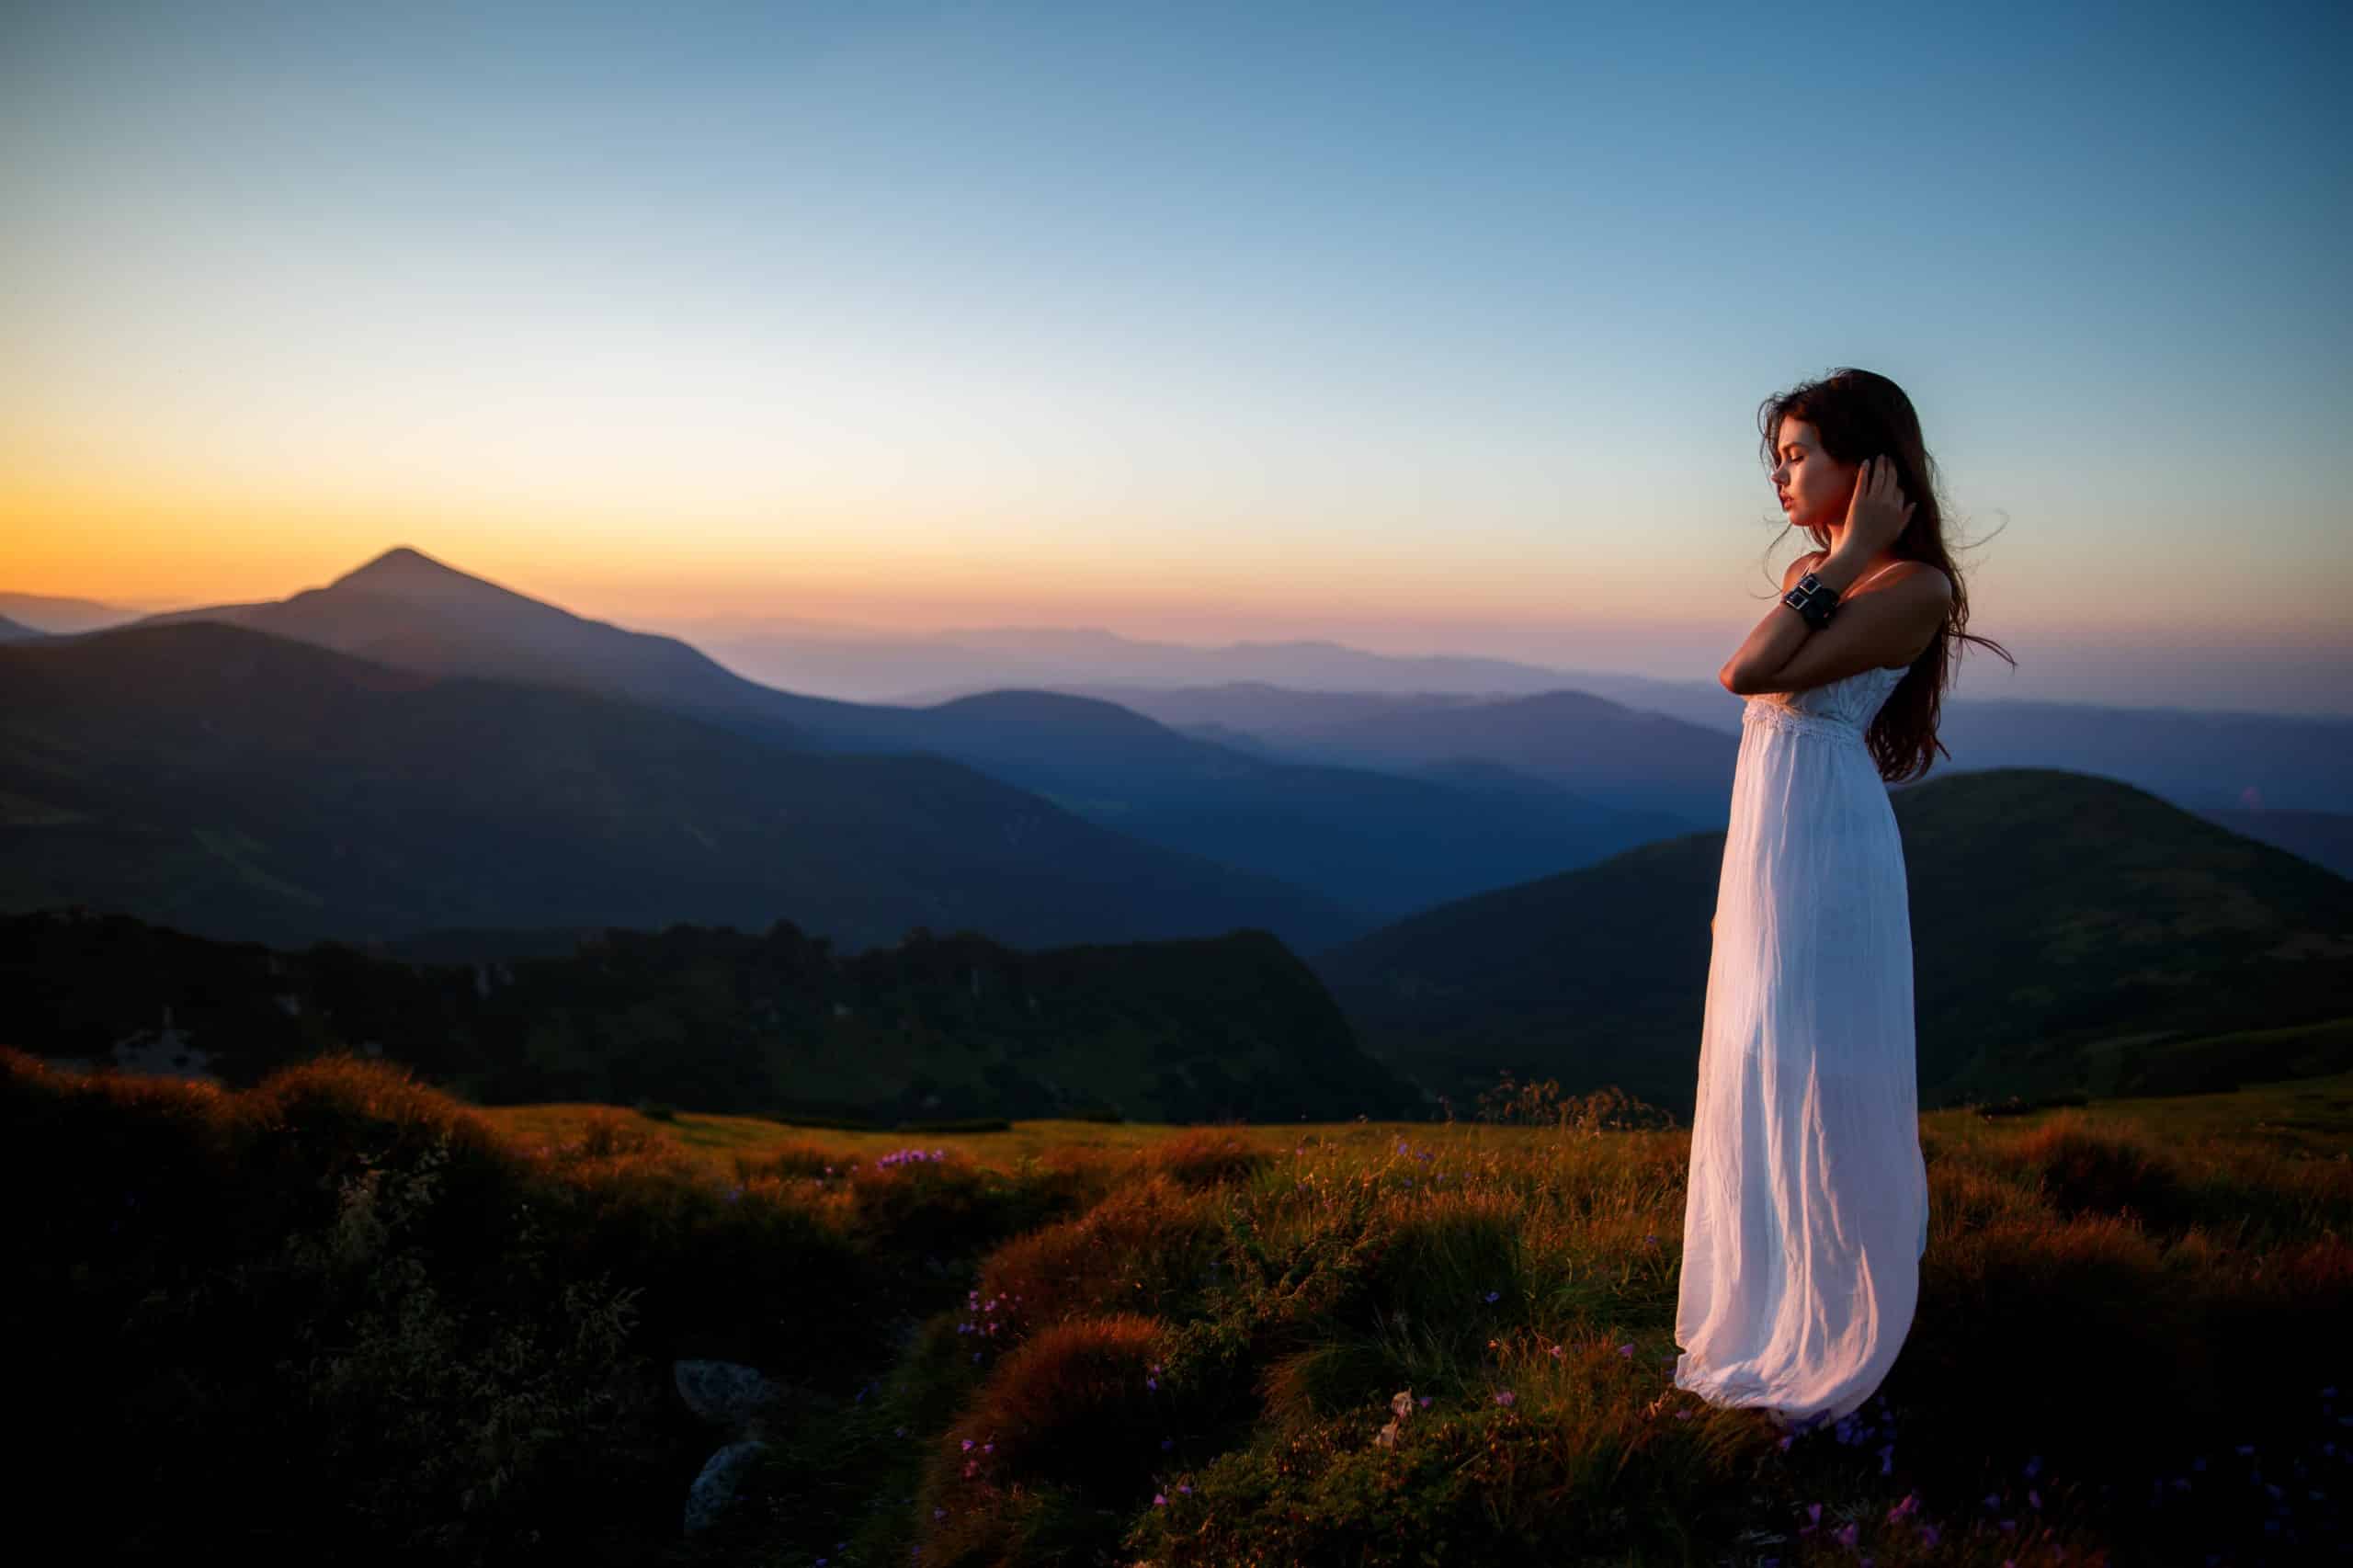 Young woman in long white dress on a hilltop enjoying the morning sunrise, nature.